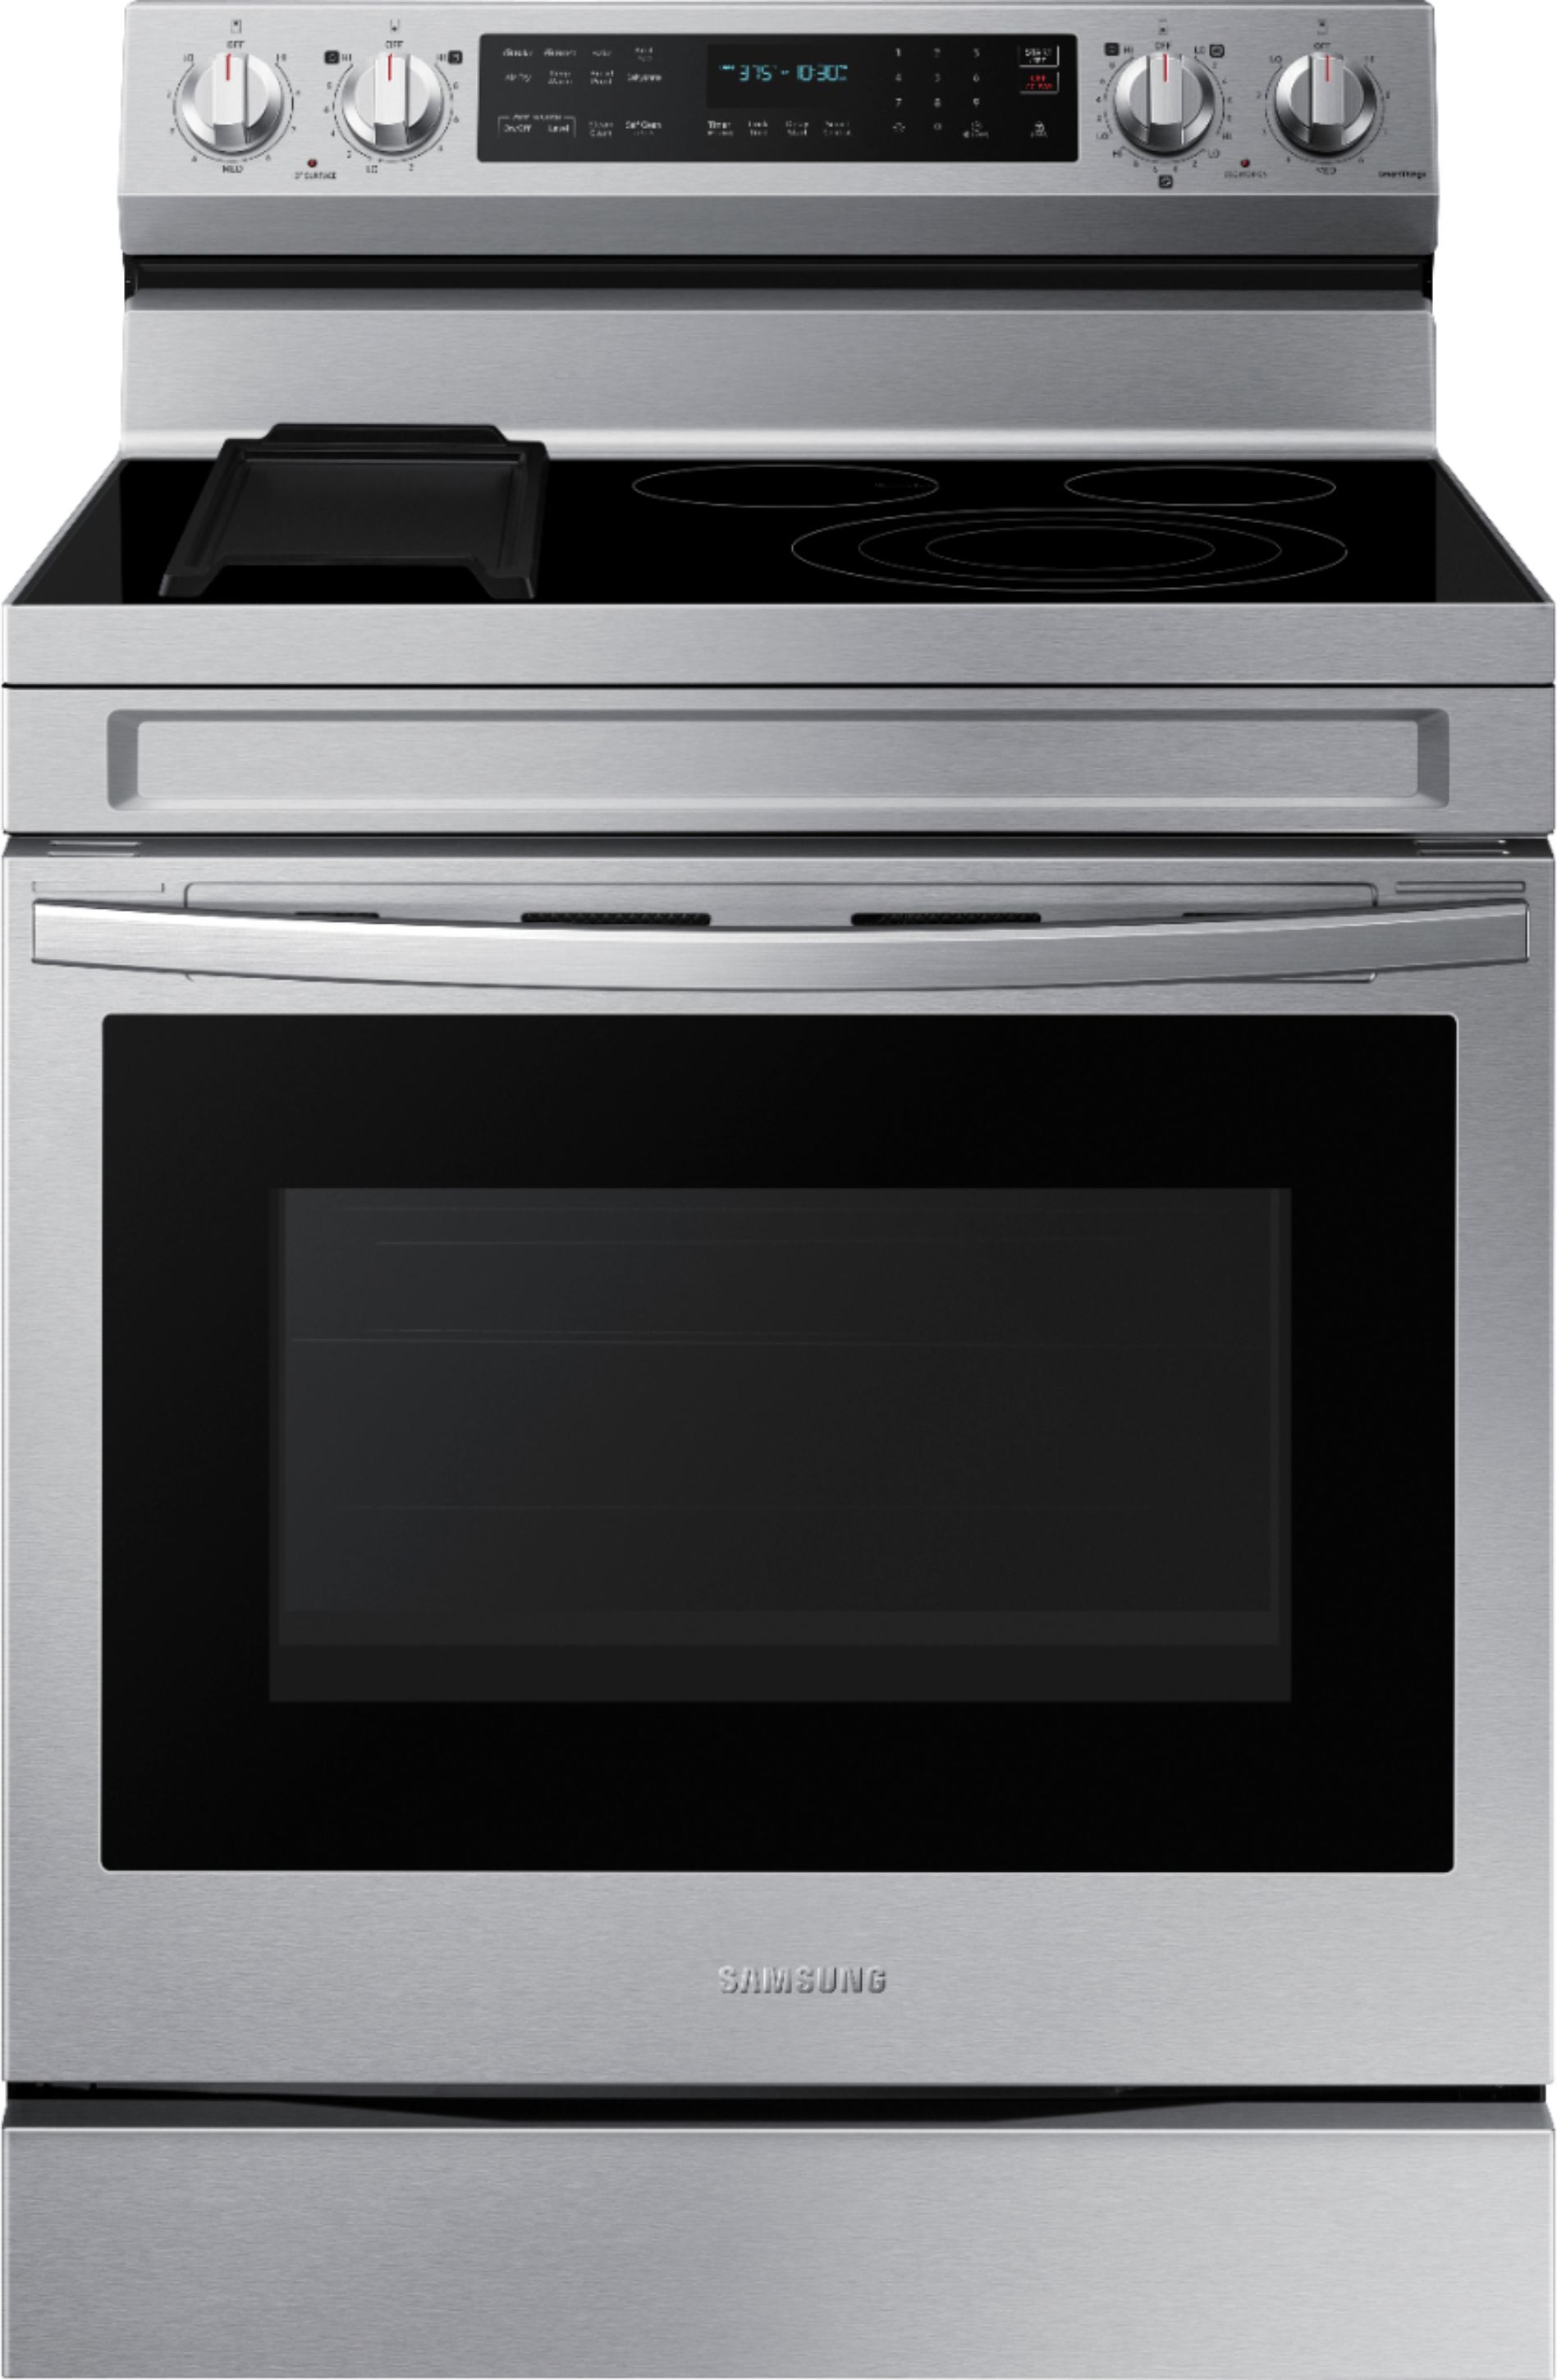 Samsung 6.3 cu. ft. Freestanding Electric Convection+ Range with WiFi, No-Preheat Air Fry and Griddle Stainless steel NE63A6711SS/AA - Best Buy